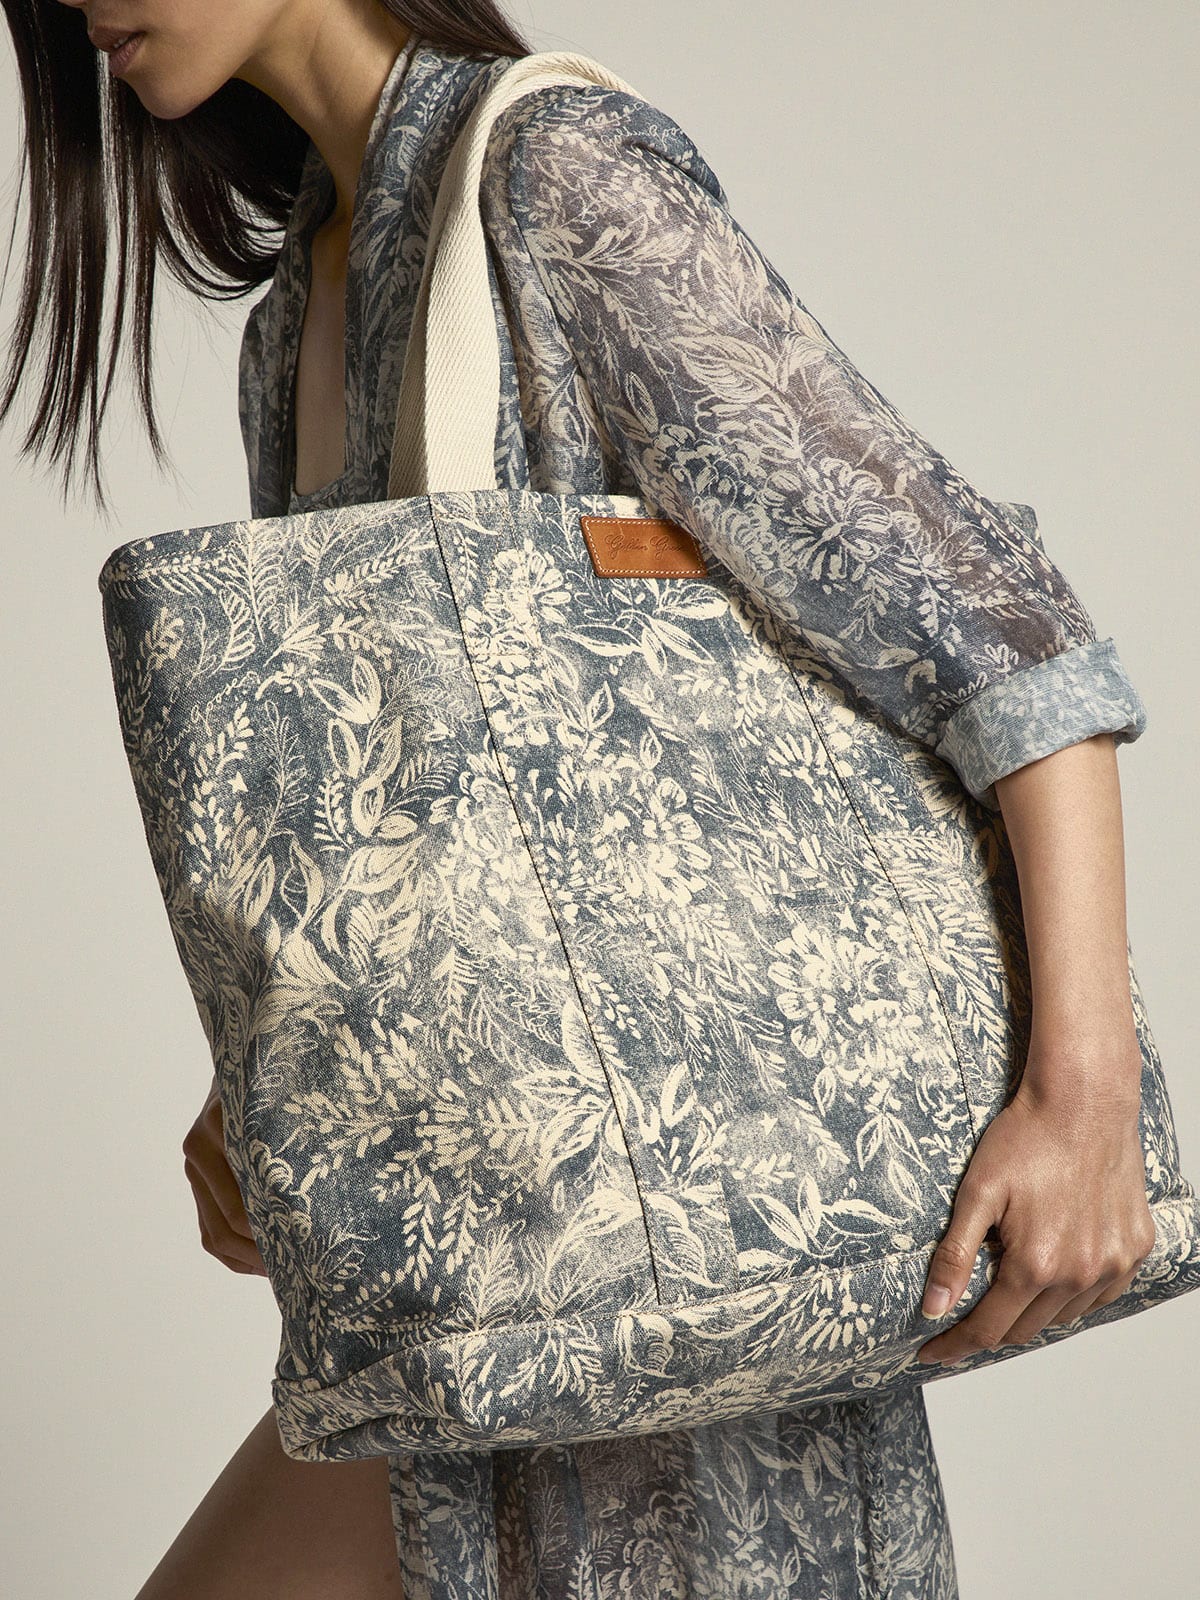 Golden Goose - Golden Resort Capsule Collection canvas Ocean bag in vintage blue with contrasting white toile de jouy print in 